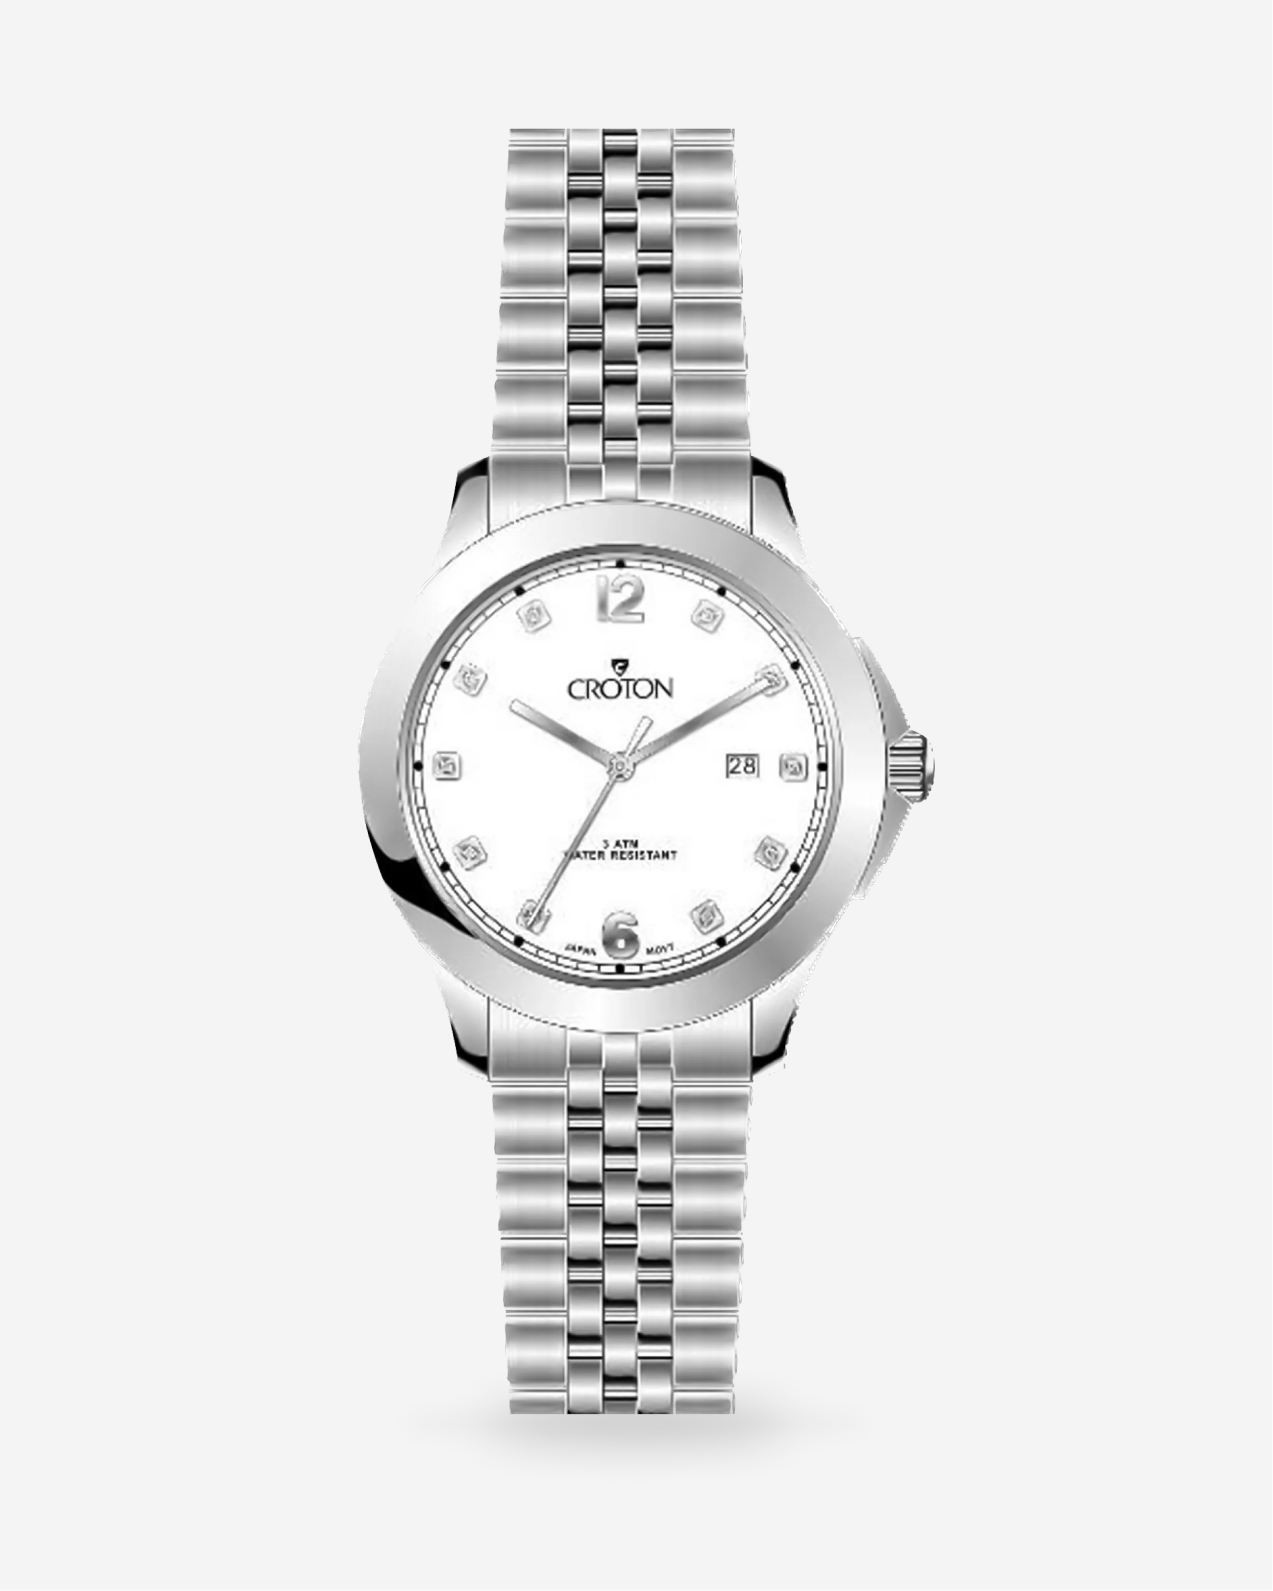 DECIDER Croton's Men's Stainless Steel Watch with Diamond Markers